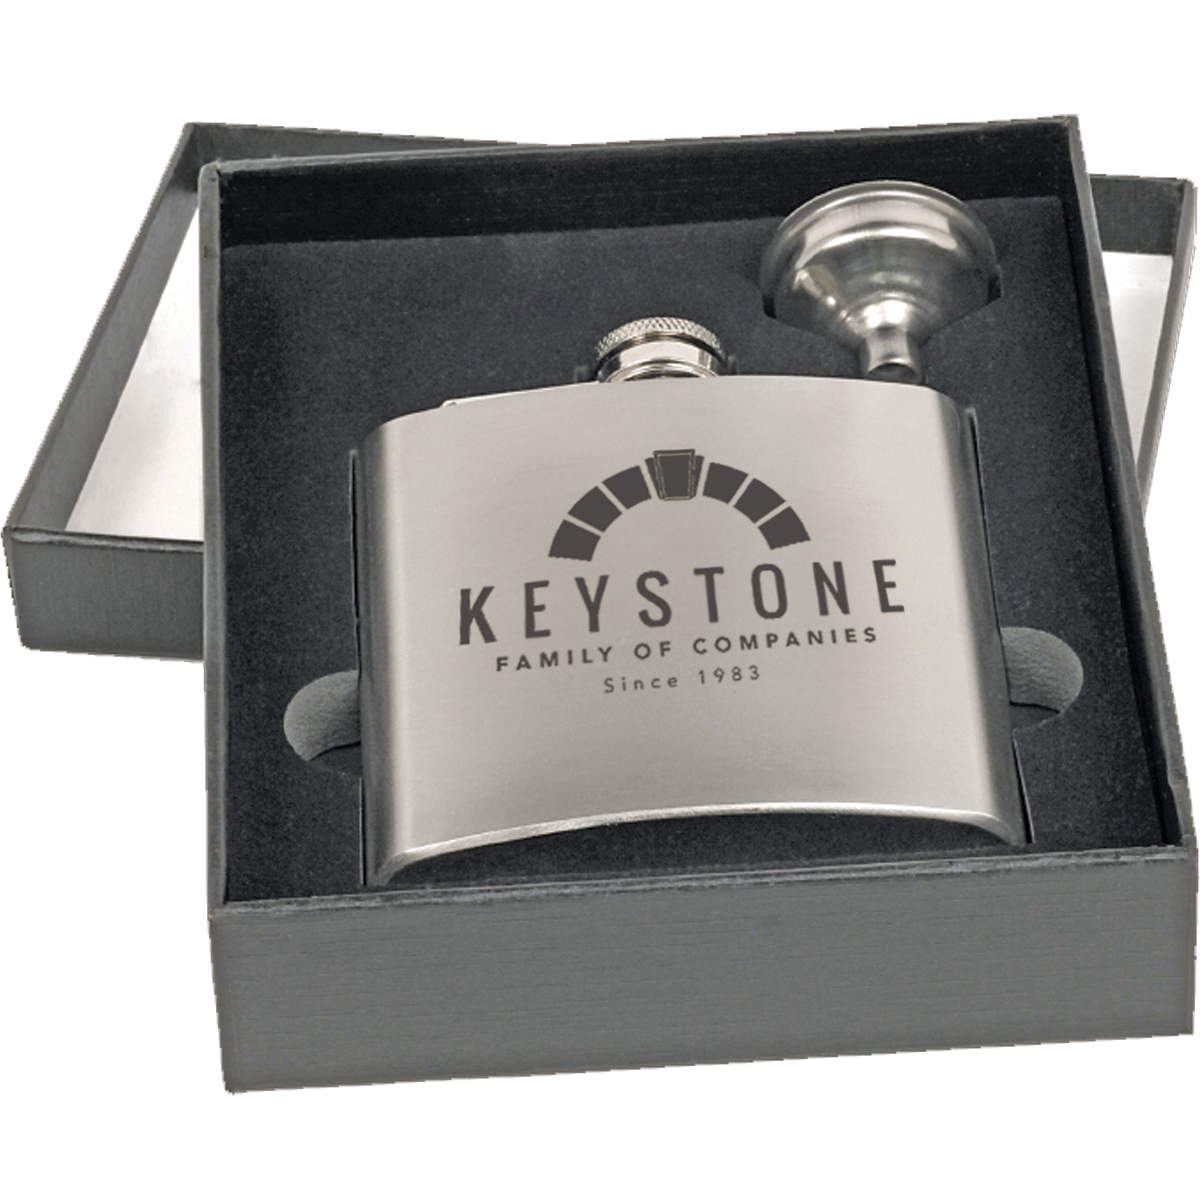 6 oz. Stainless Steel Flask Set in Presentation Box - LZR